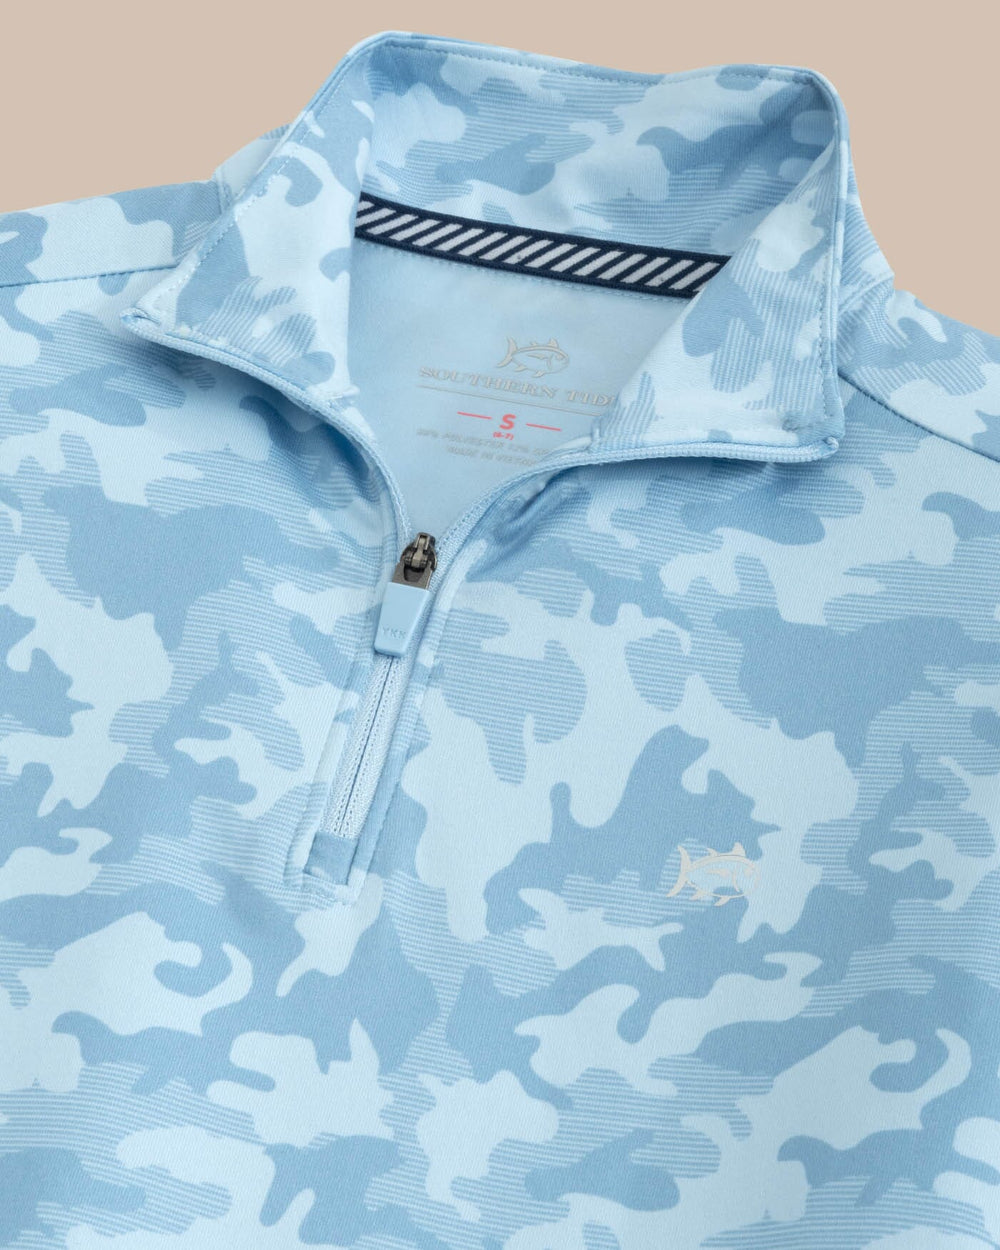 The detail view of the Southern Tide Kids Island Camo Print Cruiser Quarter Zip by Southern Tide - Clearwater Blue